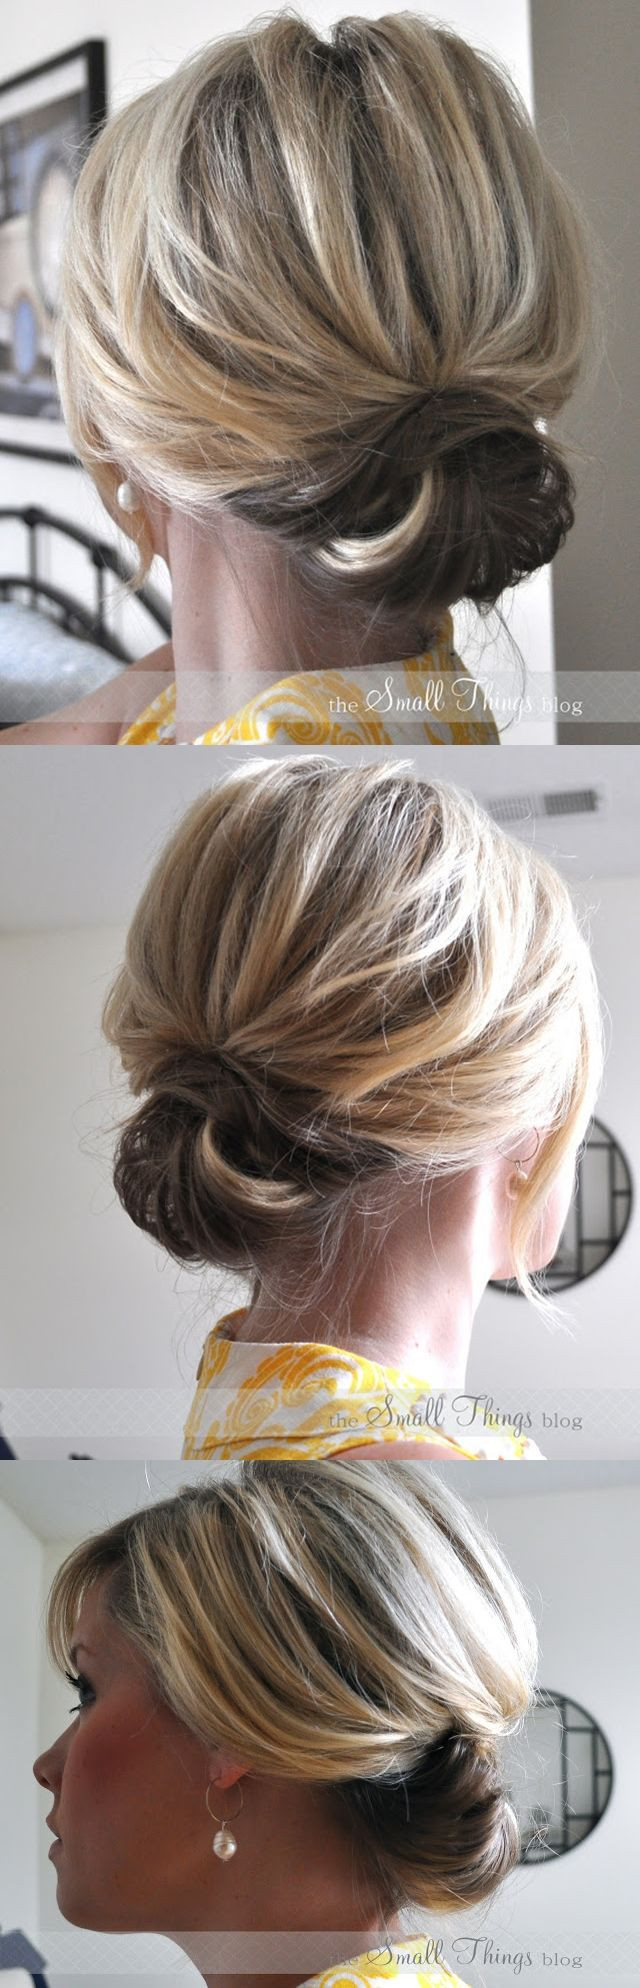 DIY Up Do Hairstyles
 The Chic Updo ♥ DIY Hairstyles ♥